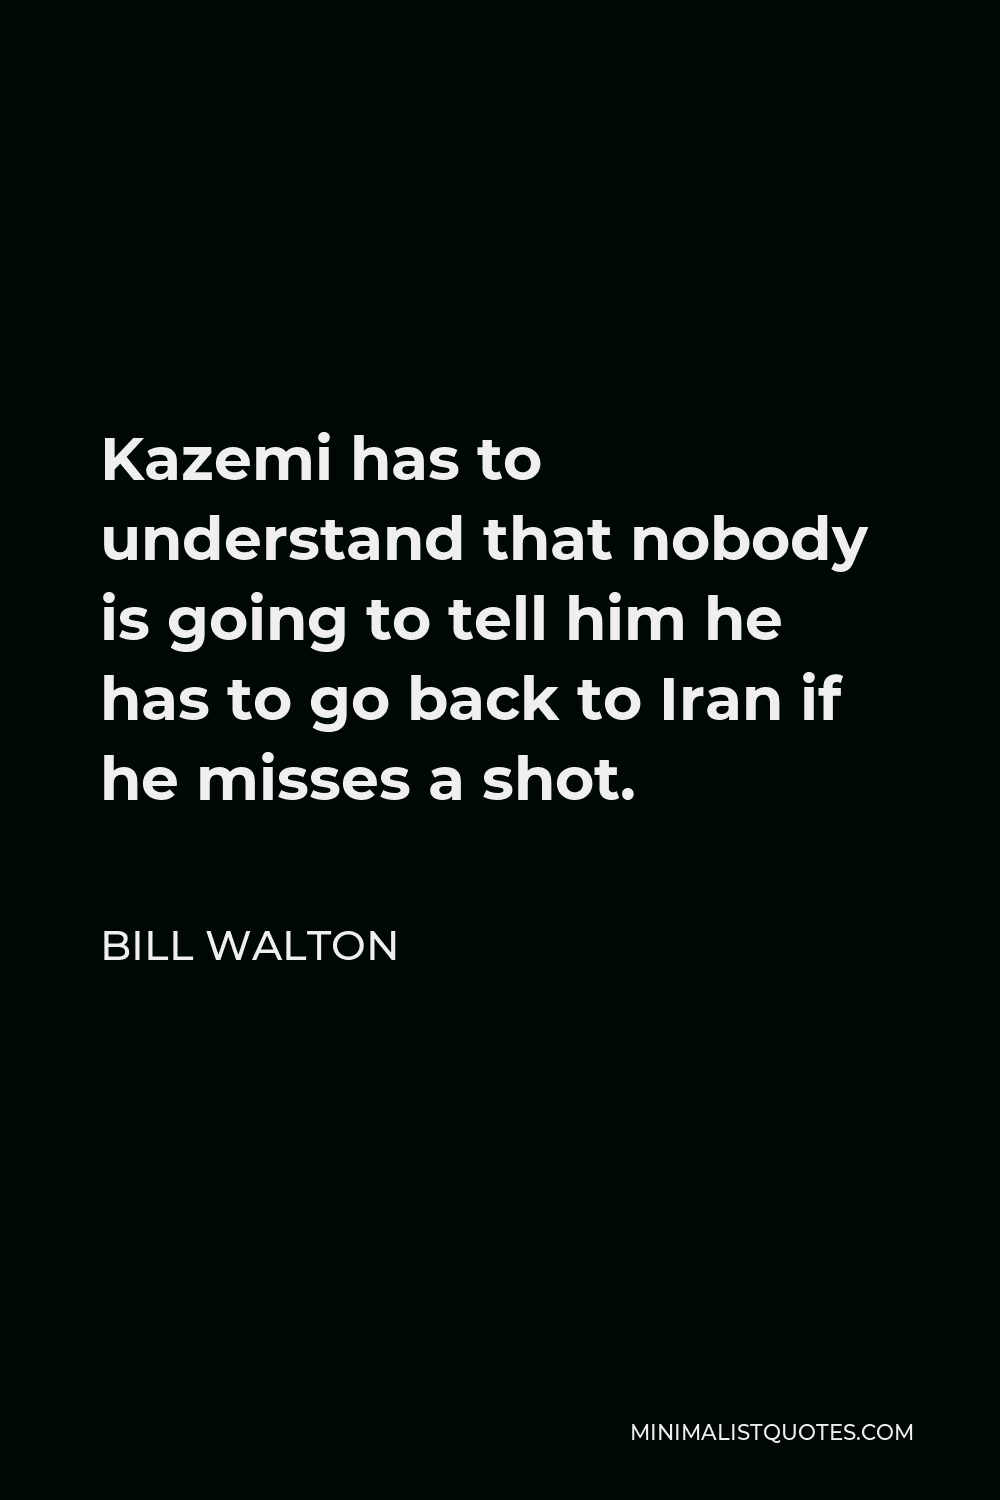 Bill Walton Quote - Kazemi has to understand that nobody is going to tell him he has to go back to Iran if he misses a shot.